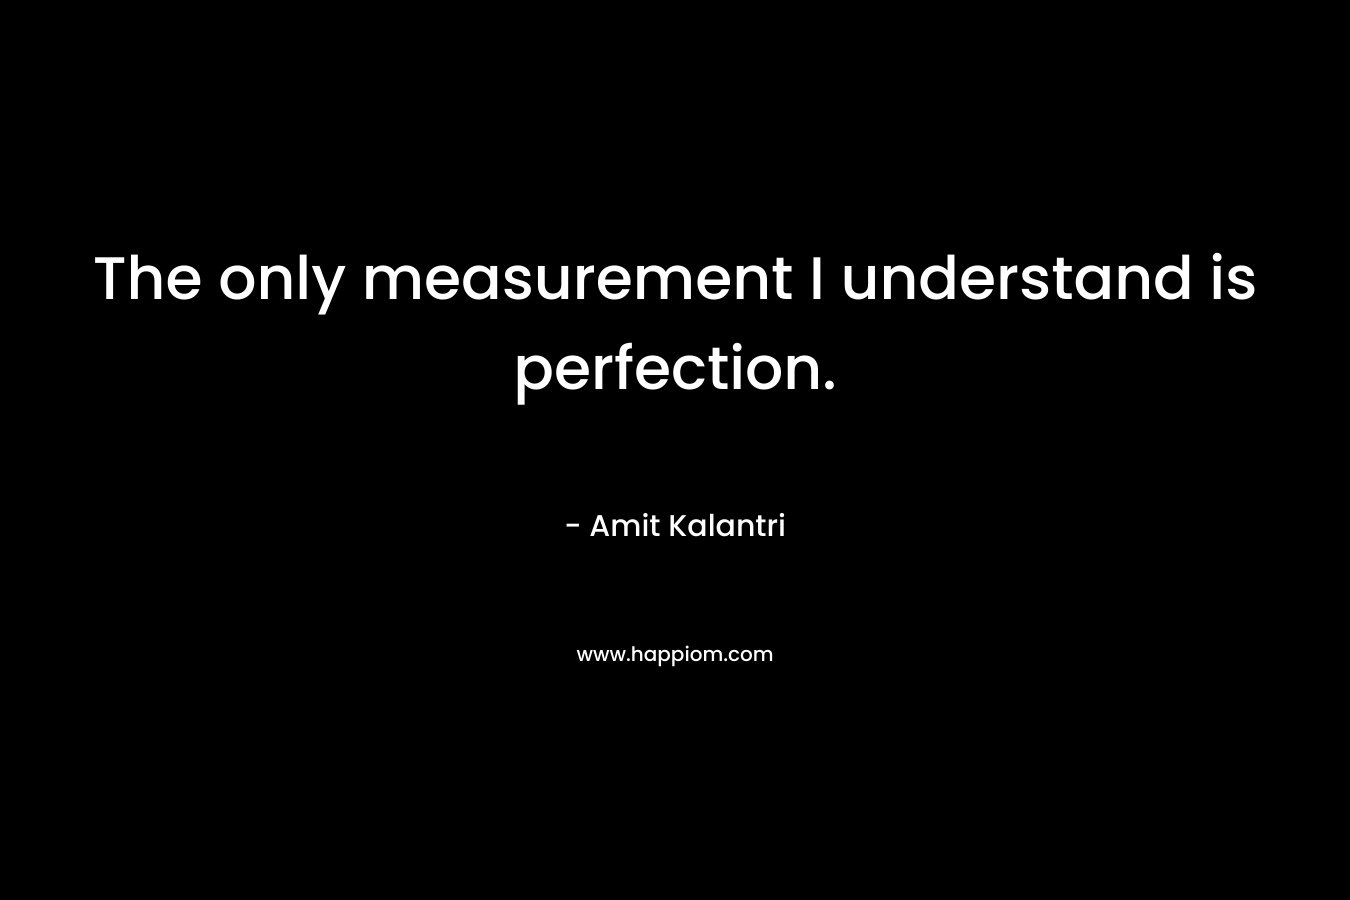 The only measurement I understand is perfection. – Amit Kalantri